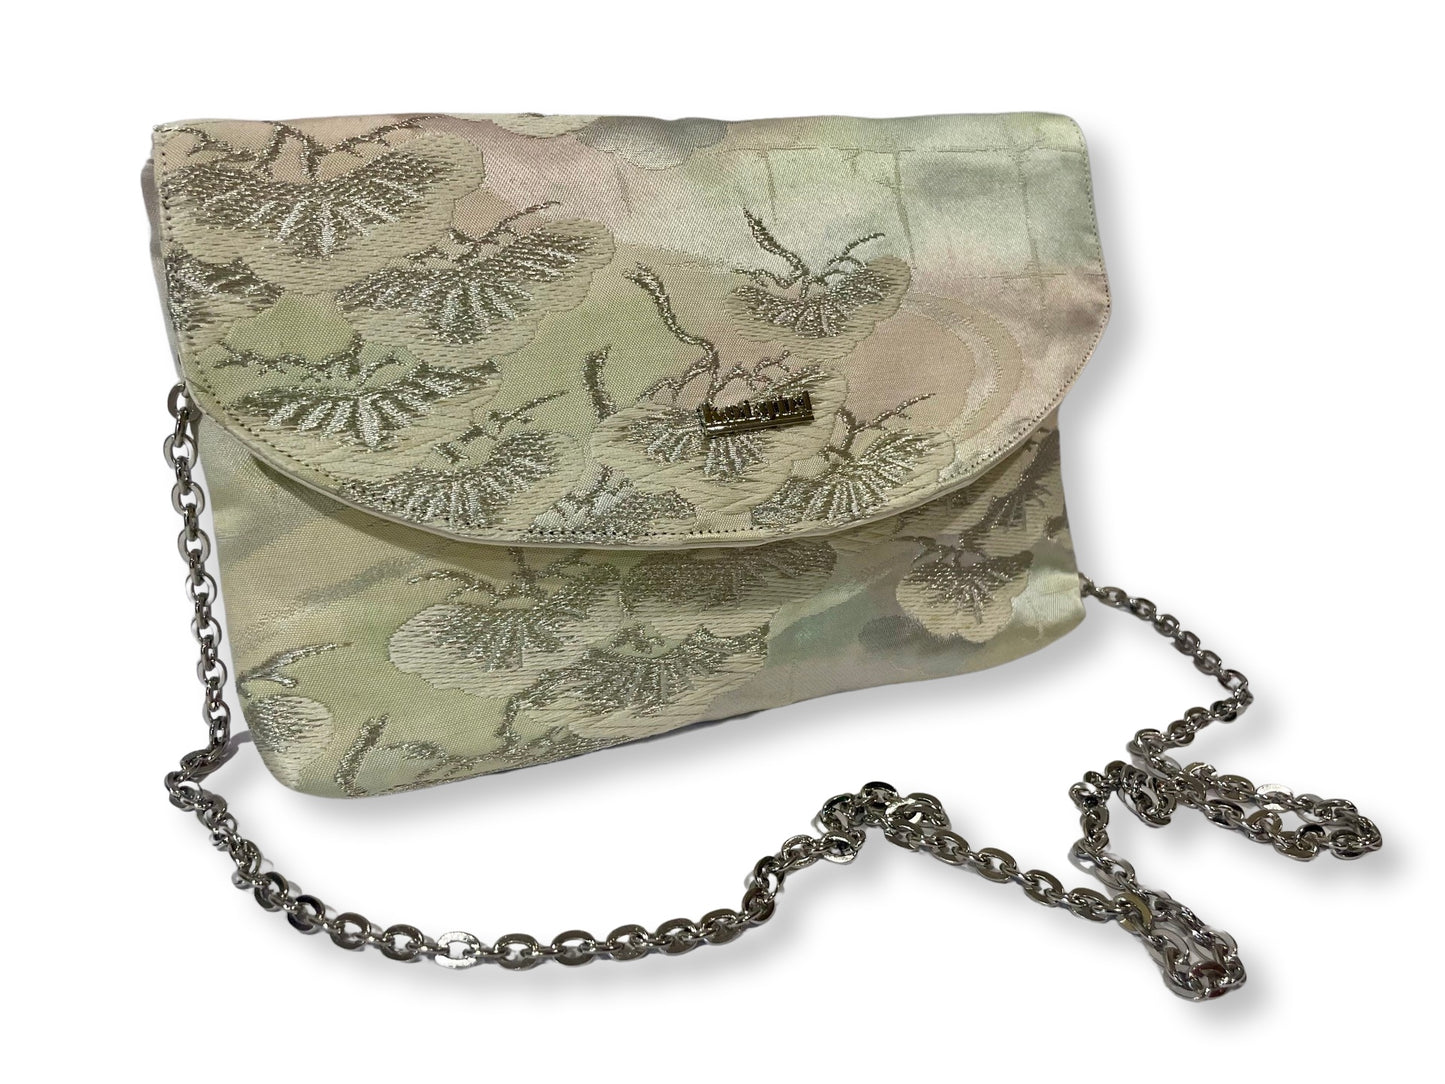 White and Silver Pine Tree Clutch